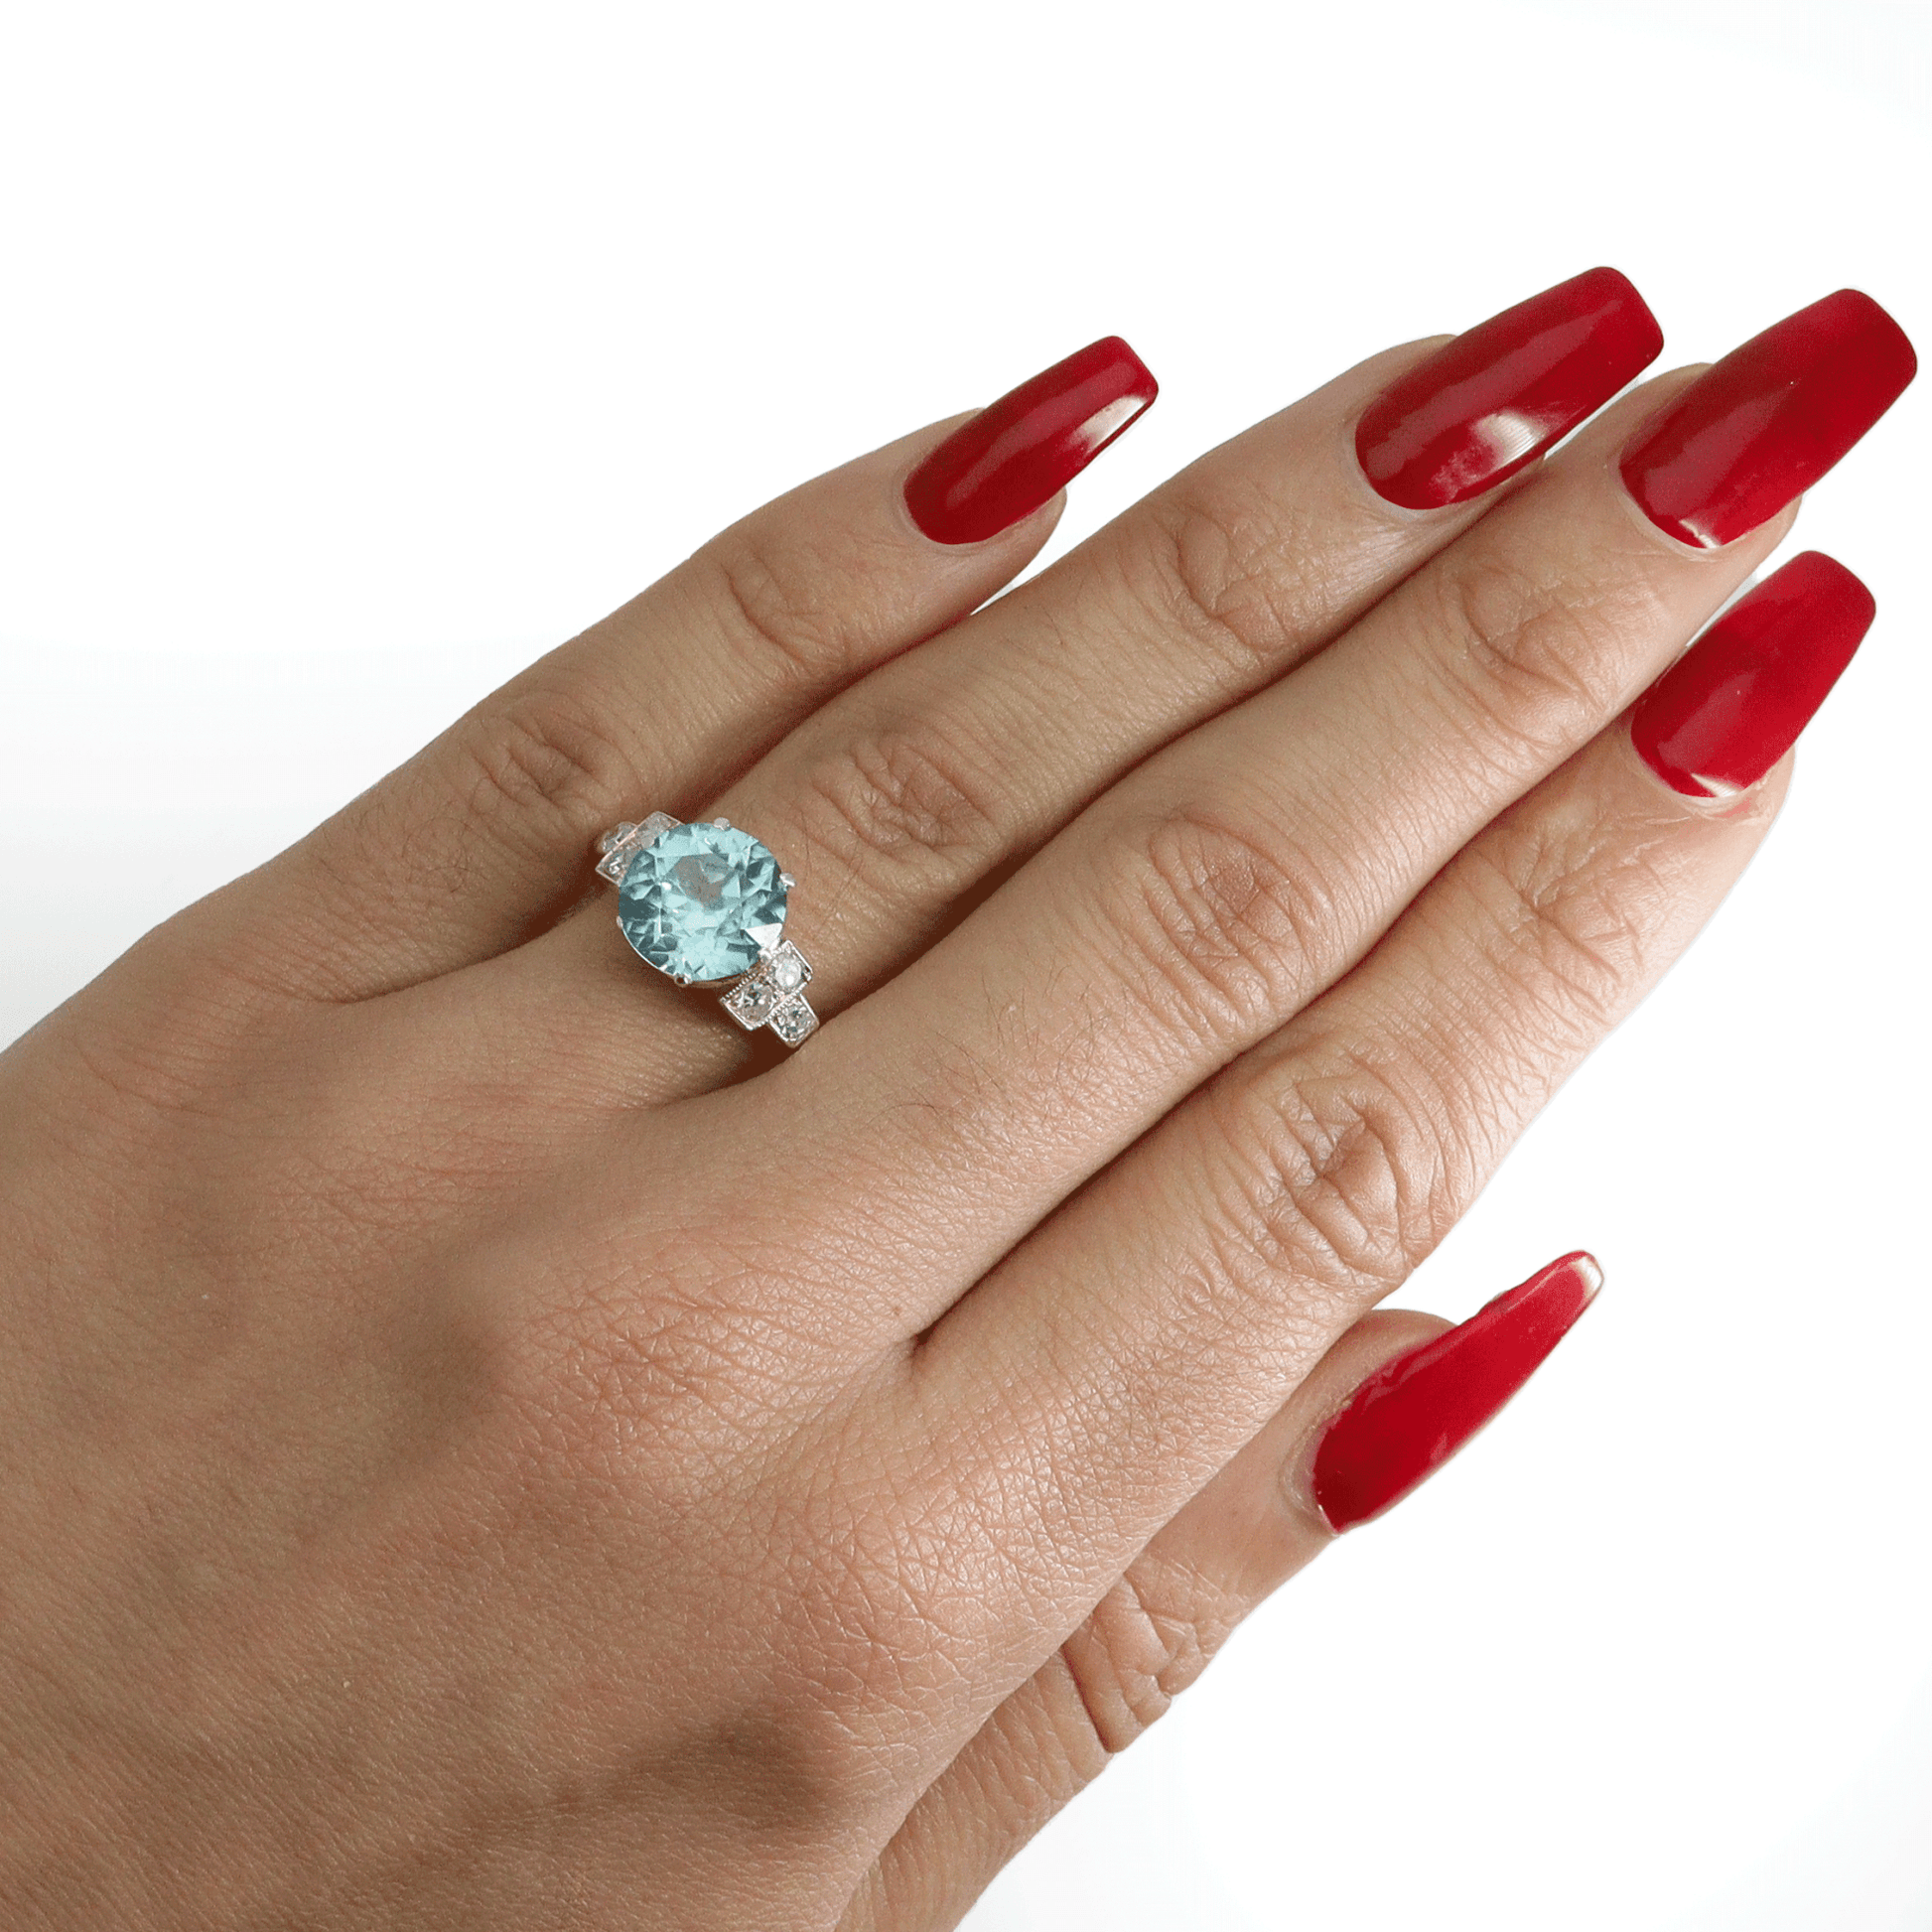 Art Deco Blue Zircon and Diamond Solitaire Ring - Friar House